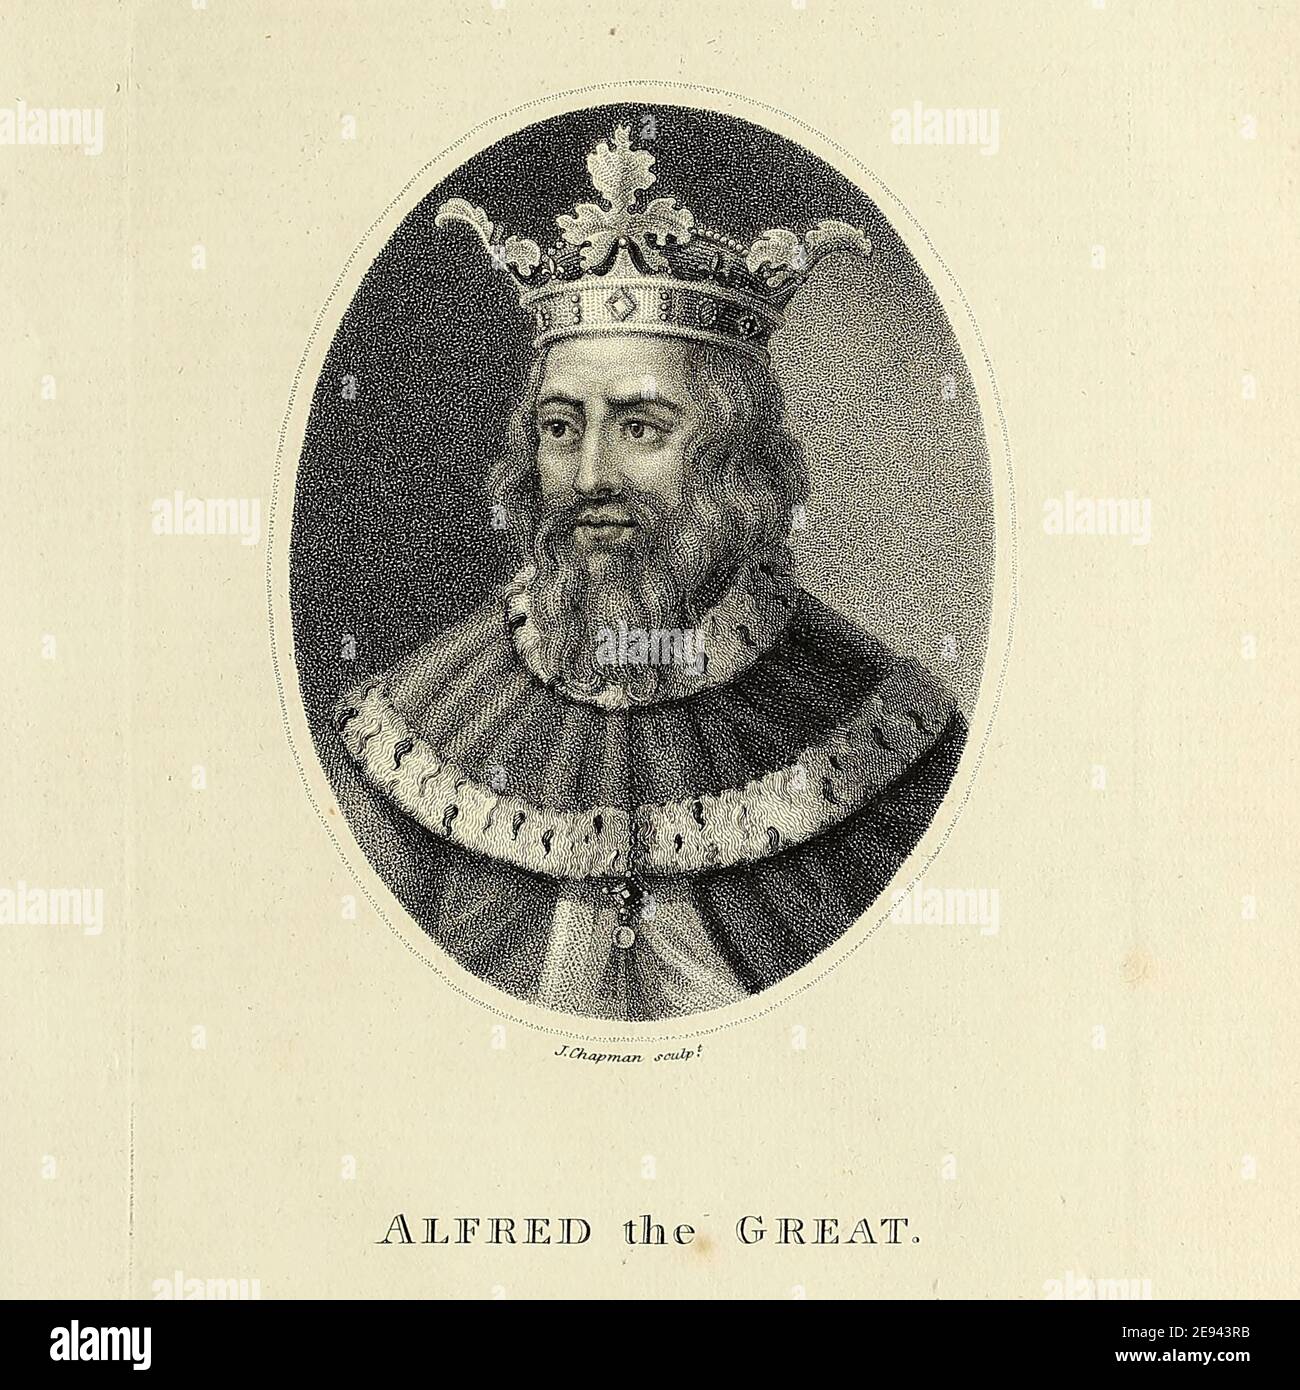 Alfred the Great (848/9 – 26 October 899) was king of the West Saxons from 871 to c. 886 and king of the Anglo-Saxons from c. 886 to 899. After ascending the throne, Alfred spent several years fighting Viking invasions. He won a decisive victory in the Battle of Edington in 878 and made an agreement with the Vikings, creating what was known as the Danelaw in the North of England. Alfred also oversaw the conversion of Viking leader Guthrum to Christianity. He defended his kingdom against the Viking attempt at conquest, becoming the dominant ruler in England Copperplate engraving From the Encycl Stock Photo